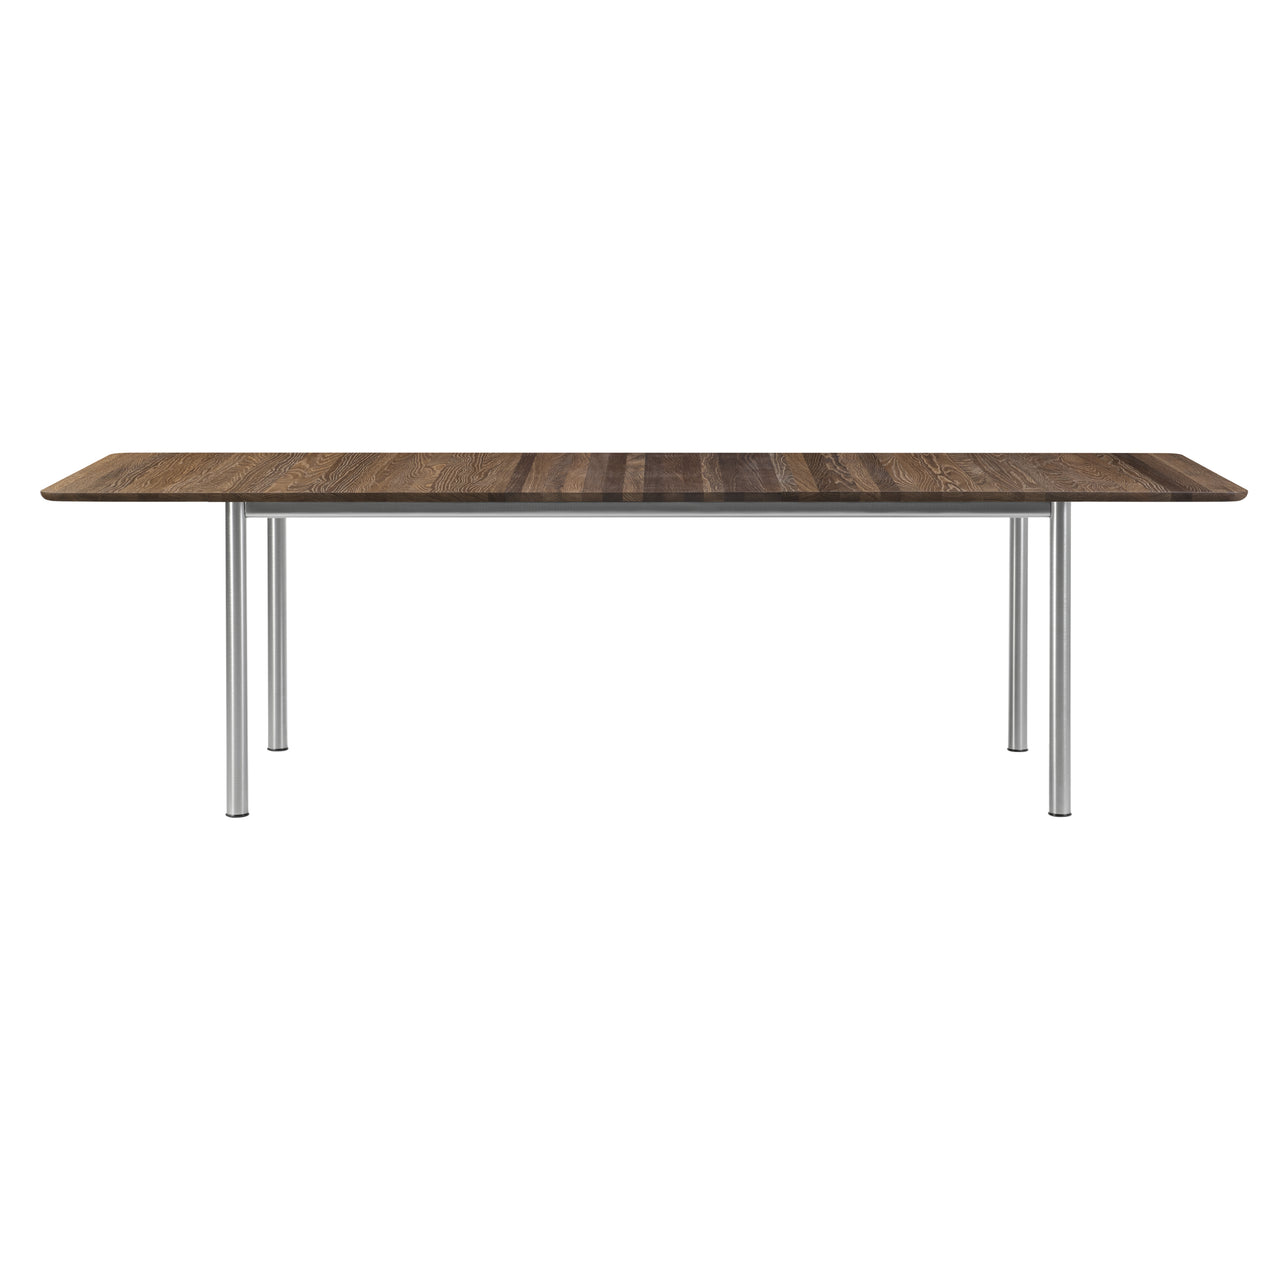 Plan Extendable Table: Smoked Oiled Oak + Brushed Steel